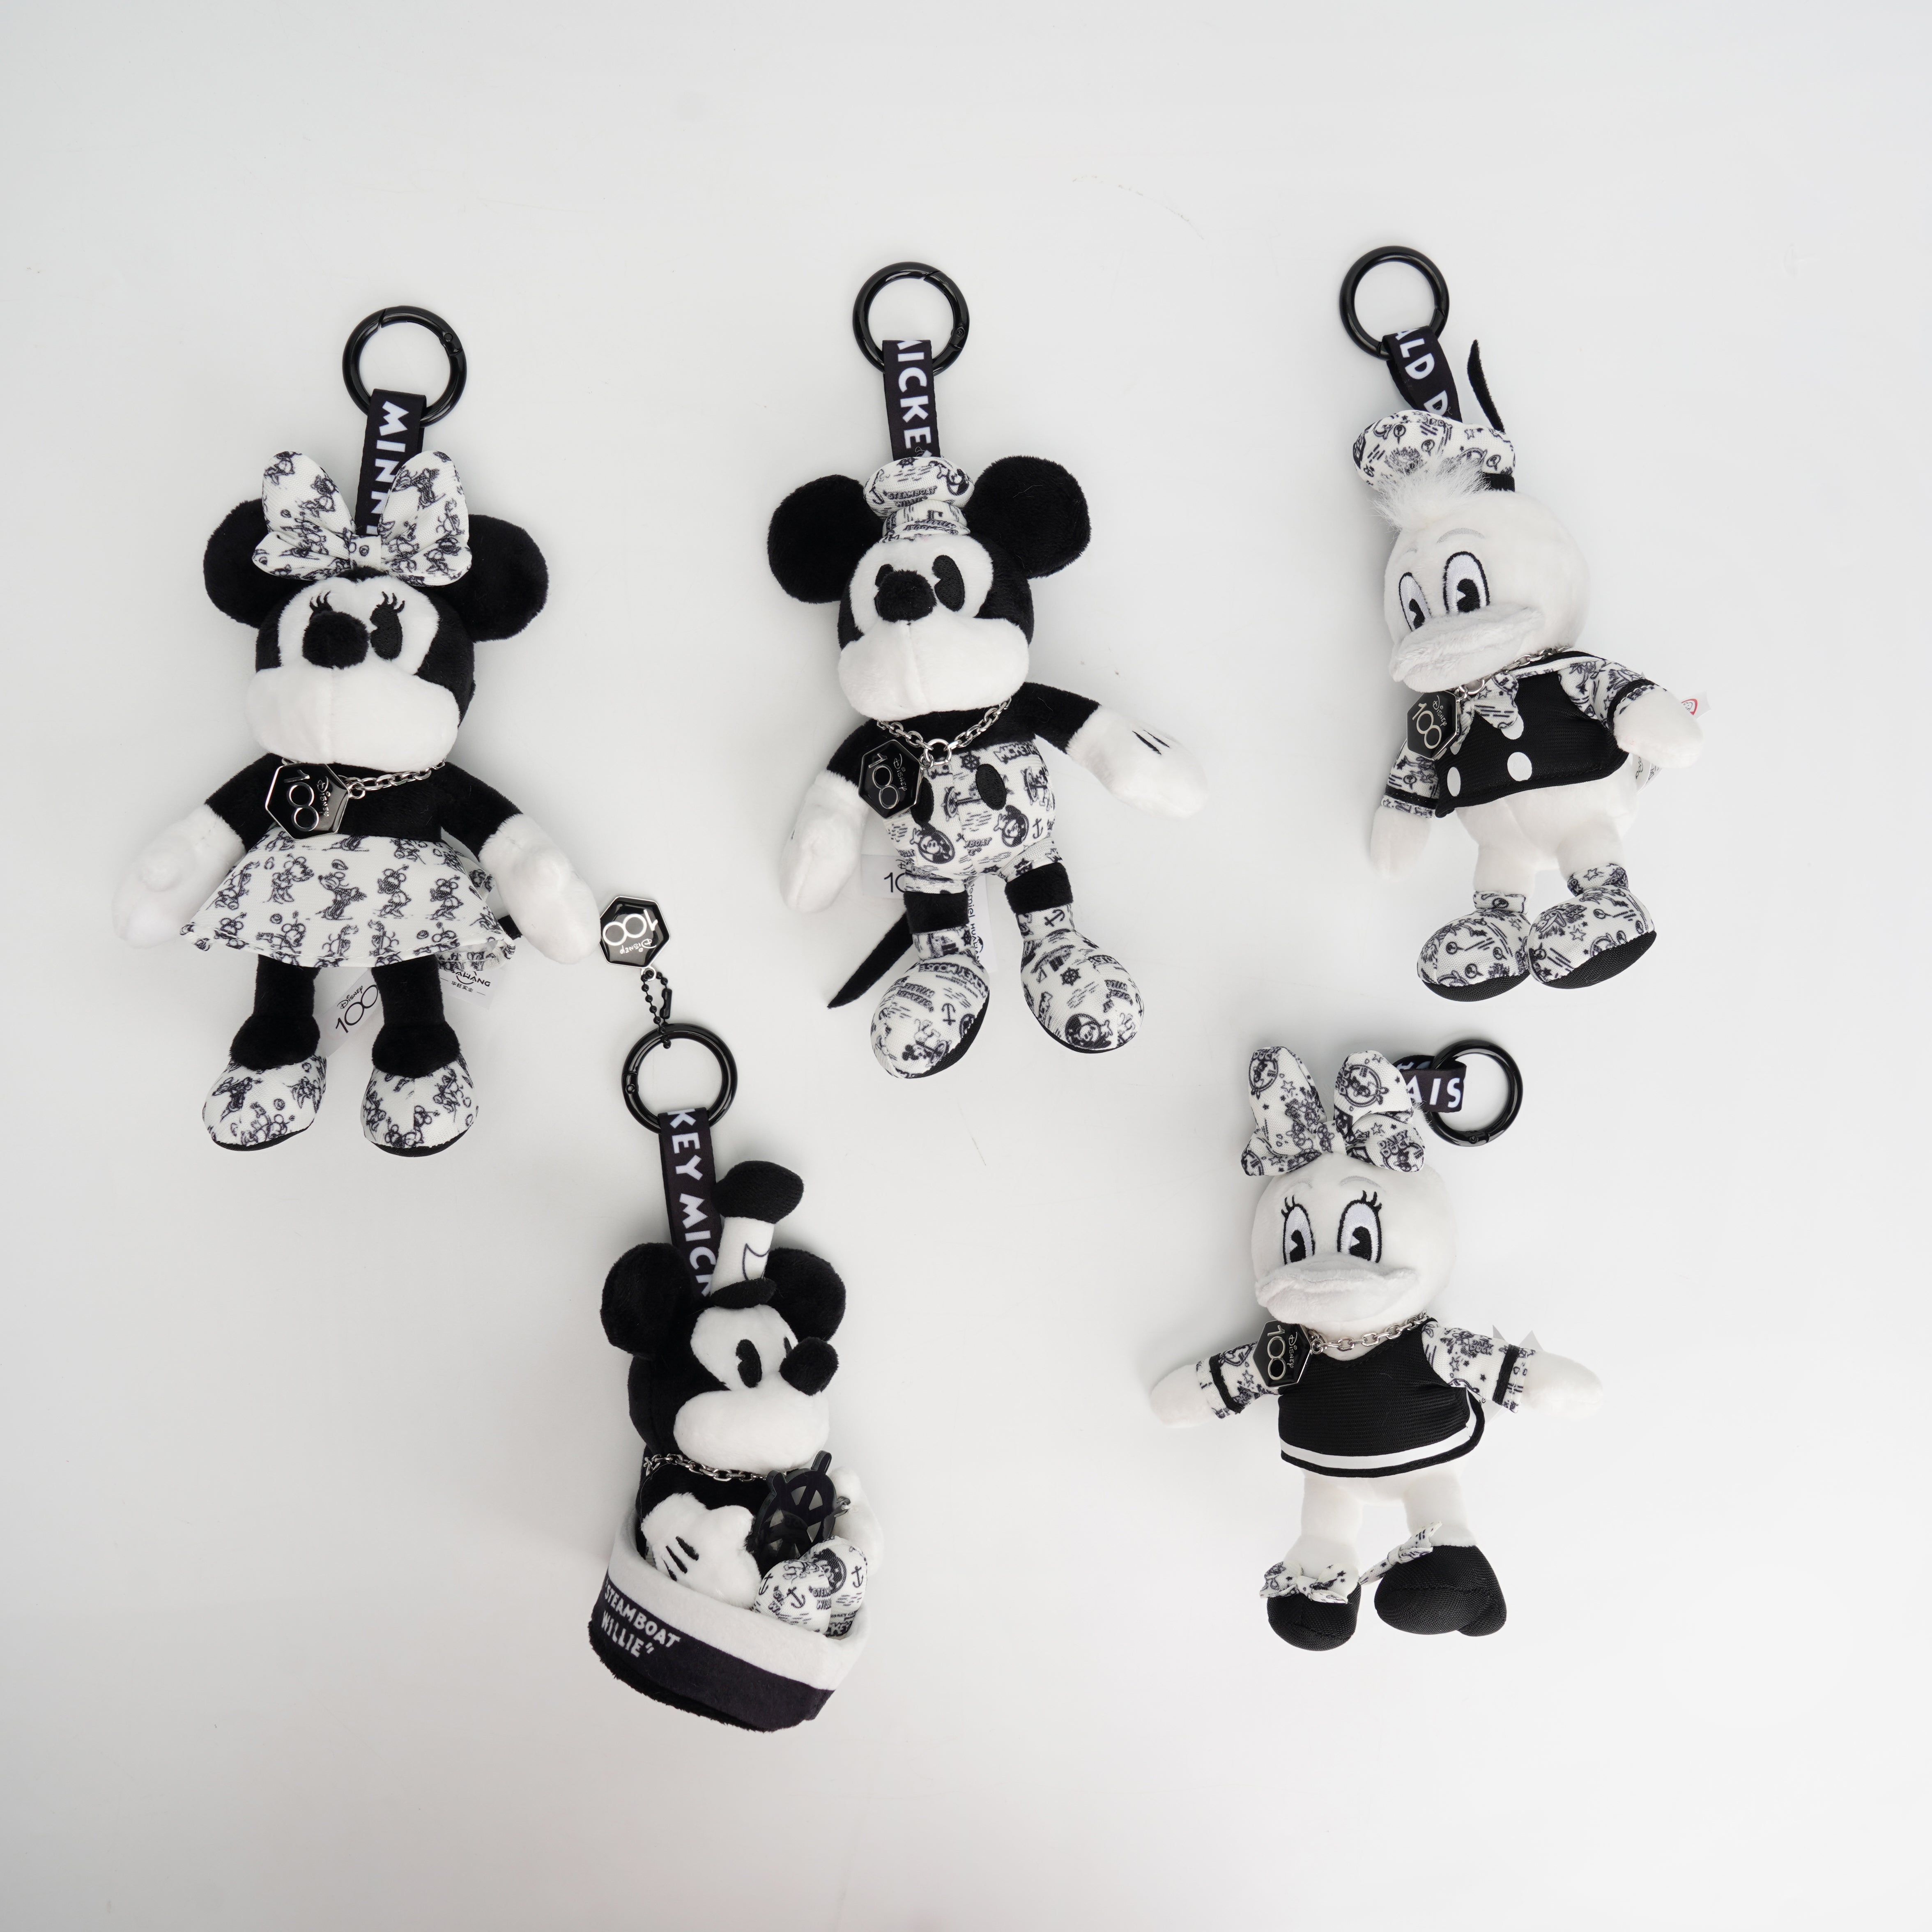 YuMe Disney 100 Surprise Capsule Series 1 Mickey Mouse